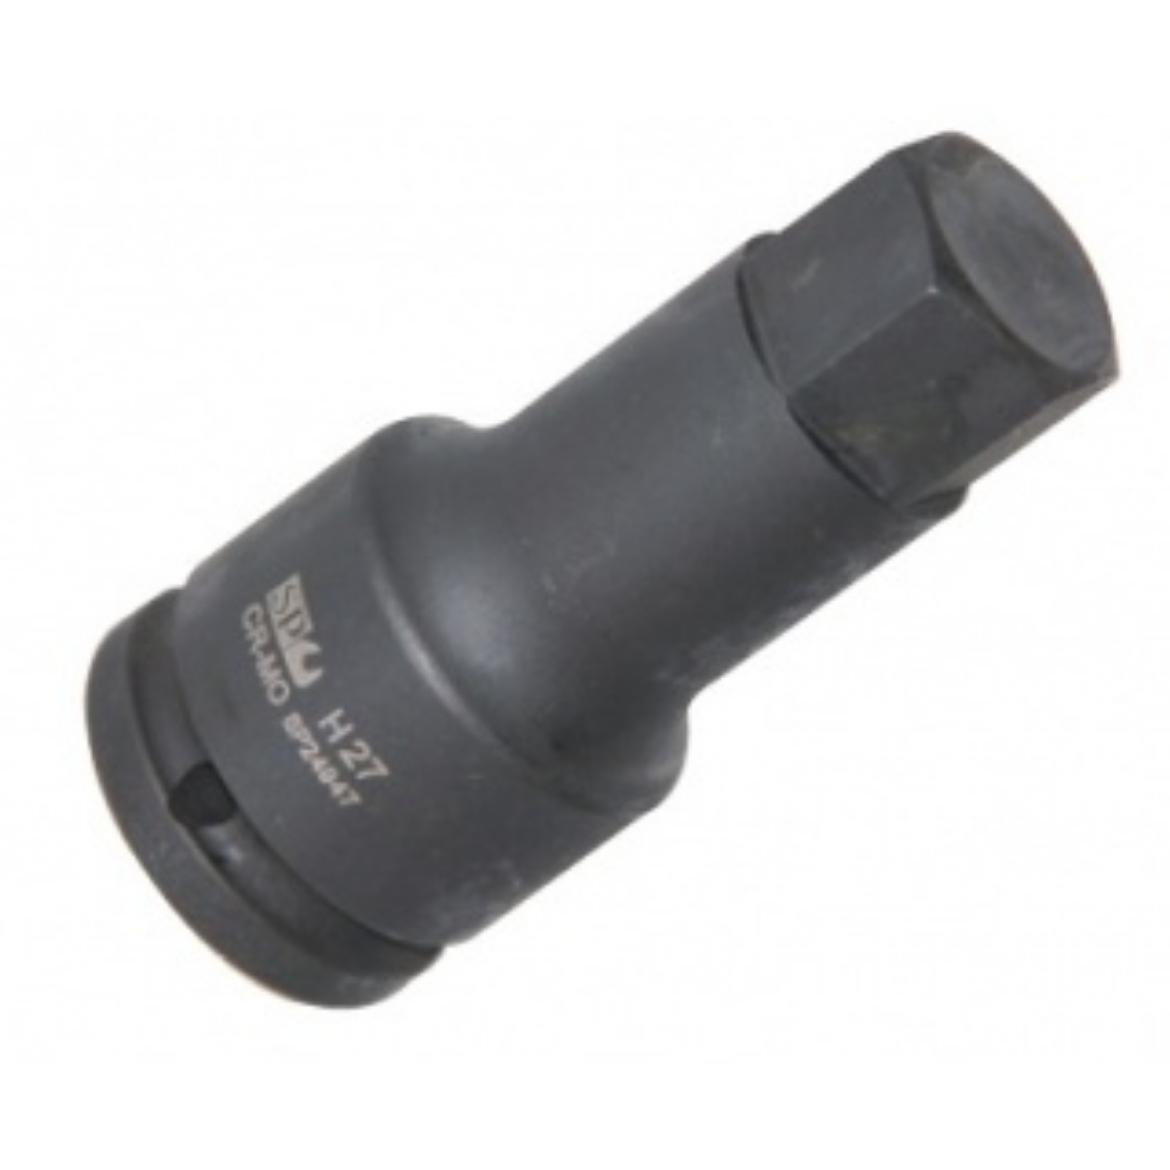 Picture of SOCKET IMPACT 3/4"DR INHEX METRIC 17MM SP TOOLS